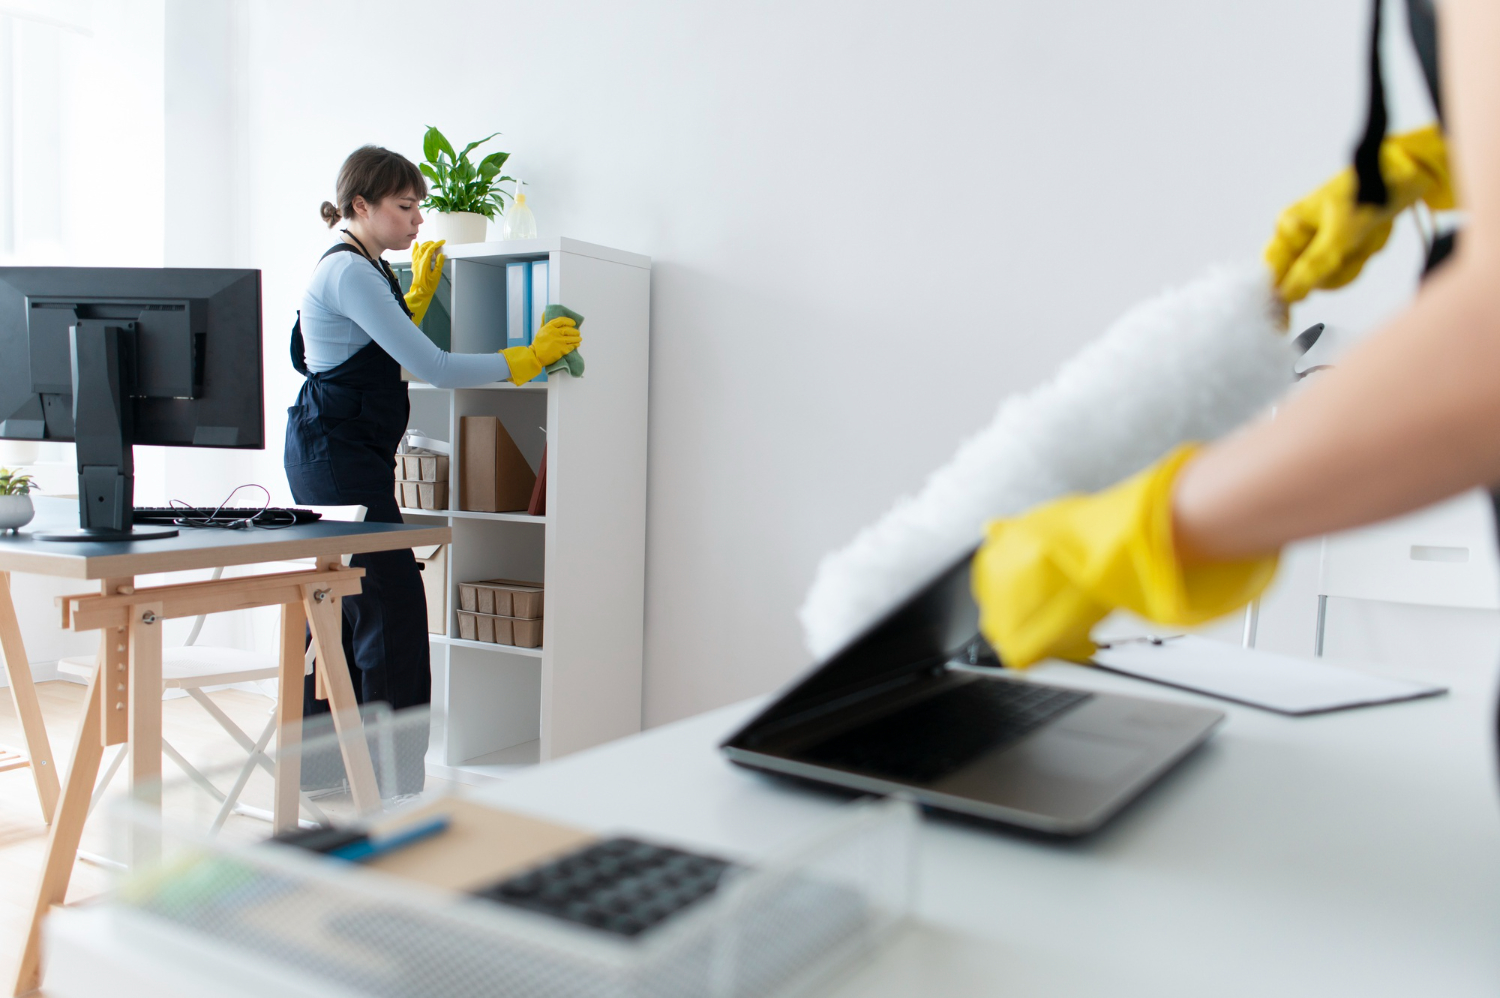 people-taking-care-office-cleaning (2)